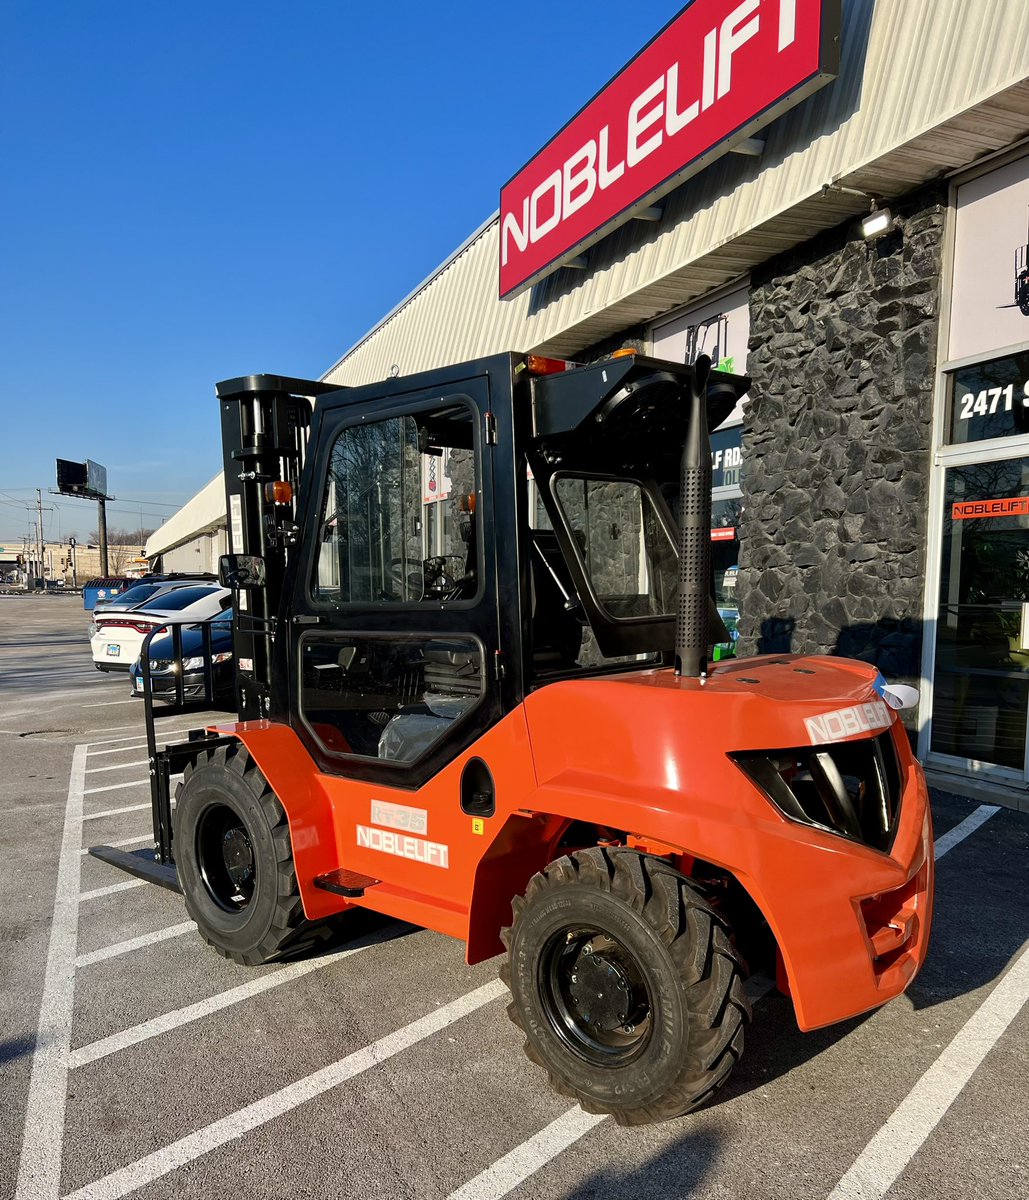 See it at PROMAT. 

Then it is a must to get our FDRT Series Rough Terrain 2WD/4WD 5-7K Capacity, Tier 4 EPA Compliant. 

Promat booth # S1568. 

#noblelift #roughterrain #promat2023 #forklift #allterrainforklift